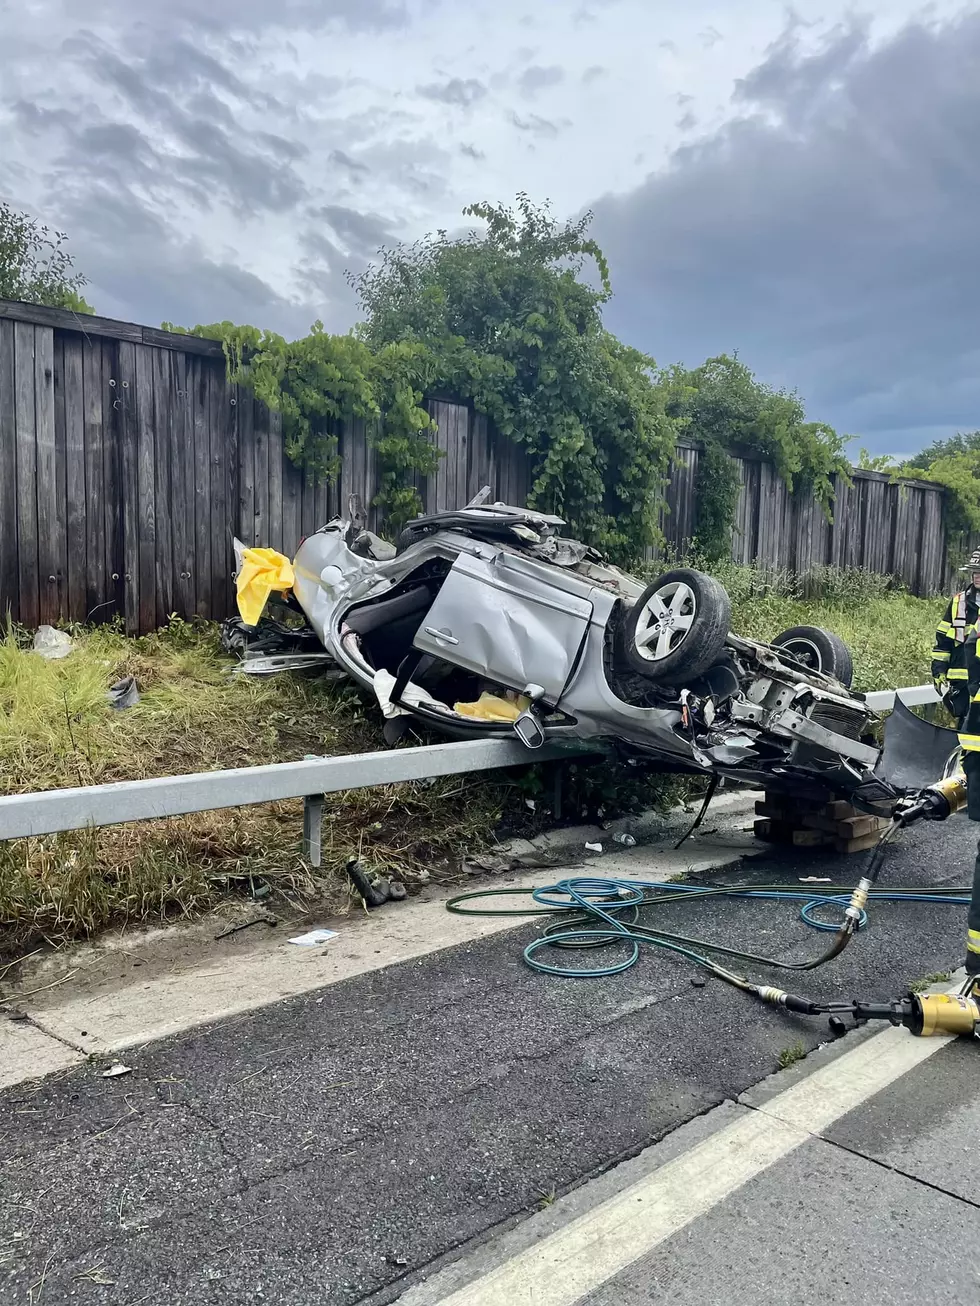 Two People Trapped in Vehicle After Latham Car Crash